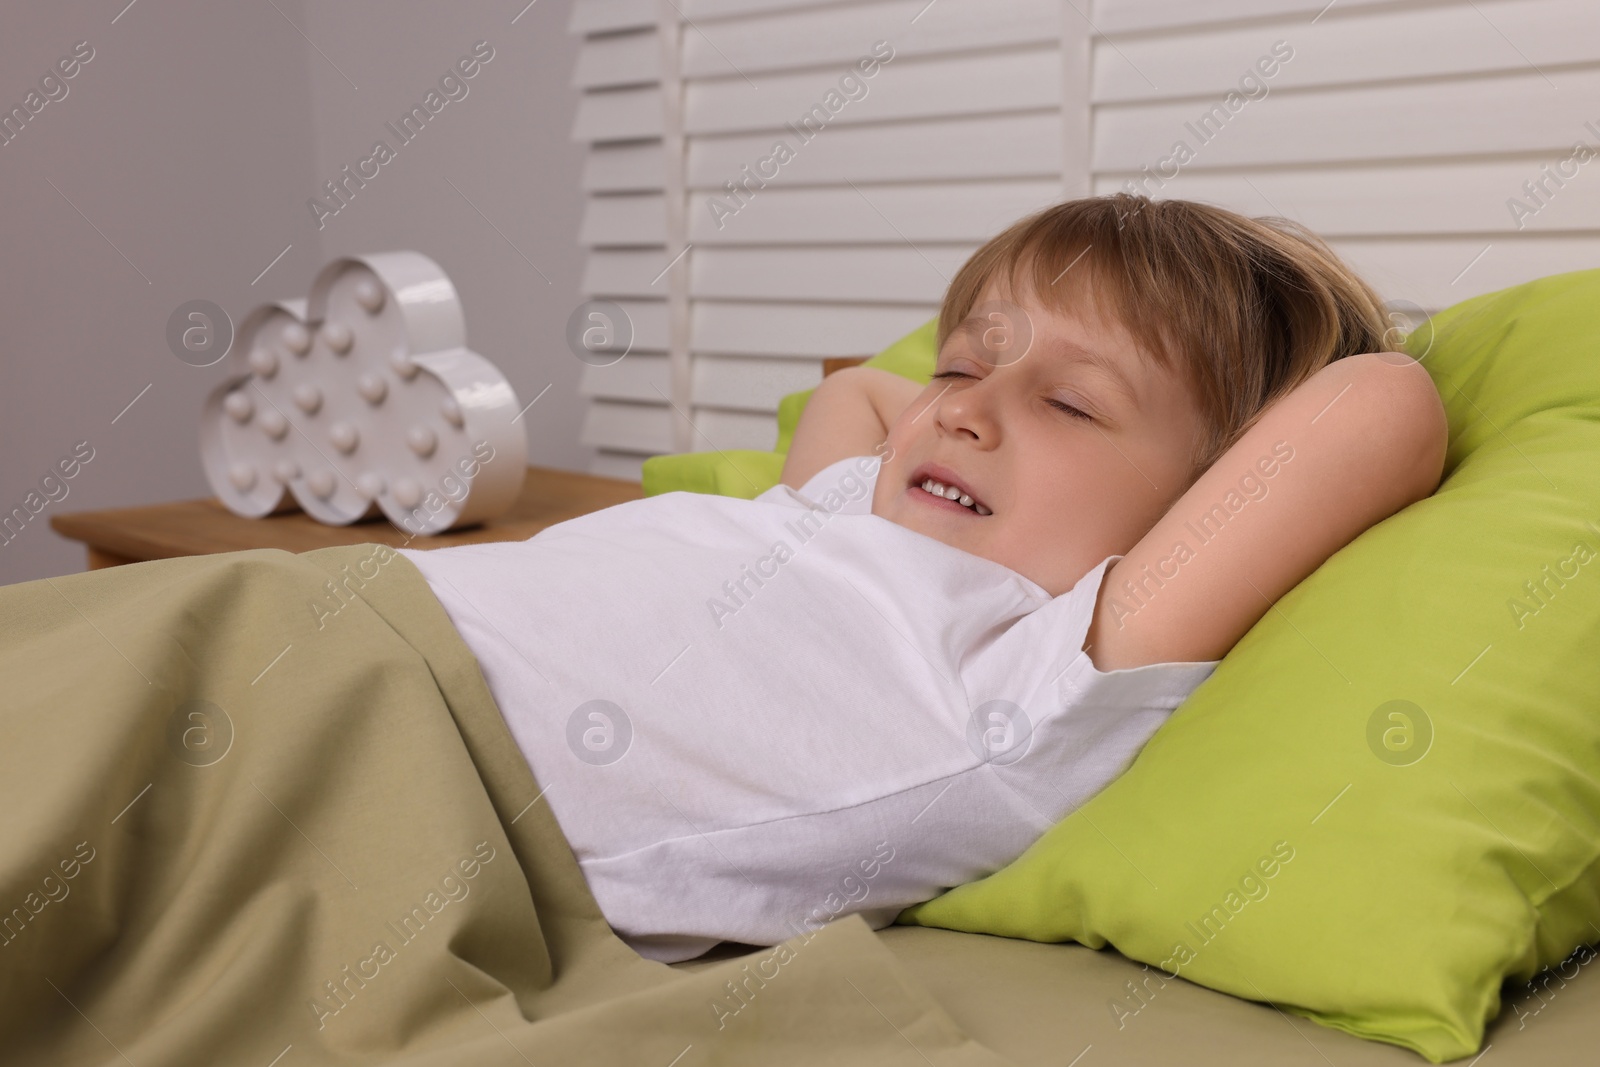 Photo of Little boy snoring while sleeping in bed indoors